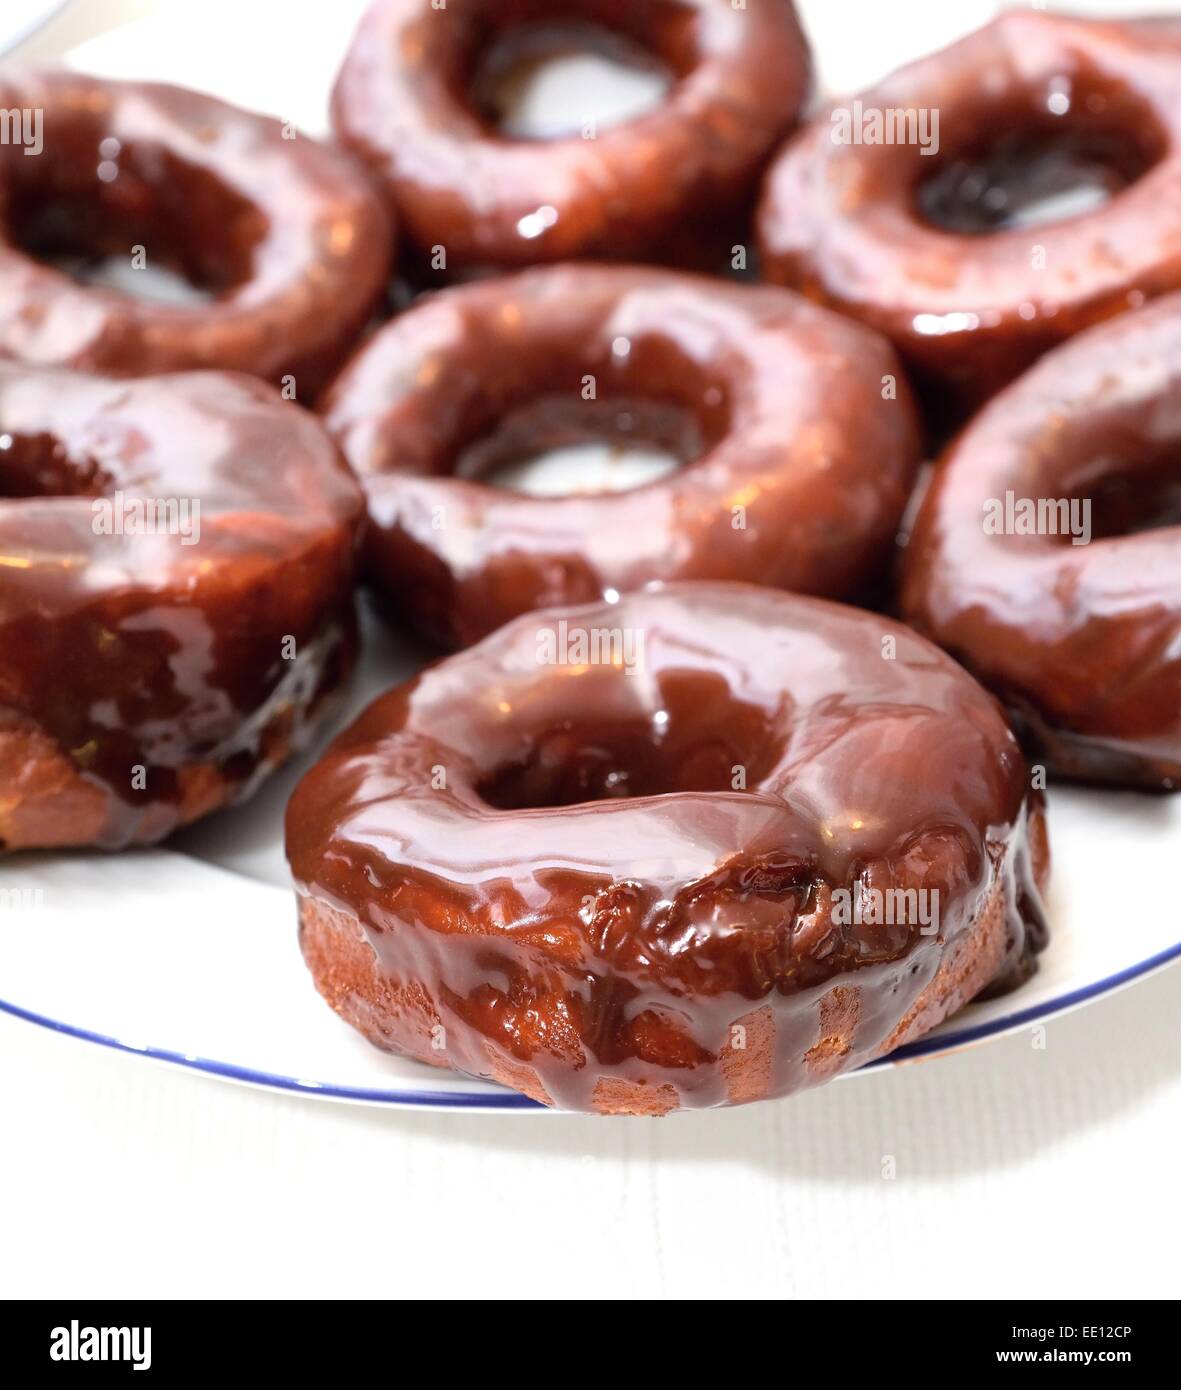 Sweet donuts on the plate with chocolate glaze. Stock Photo